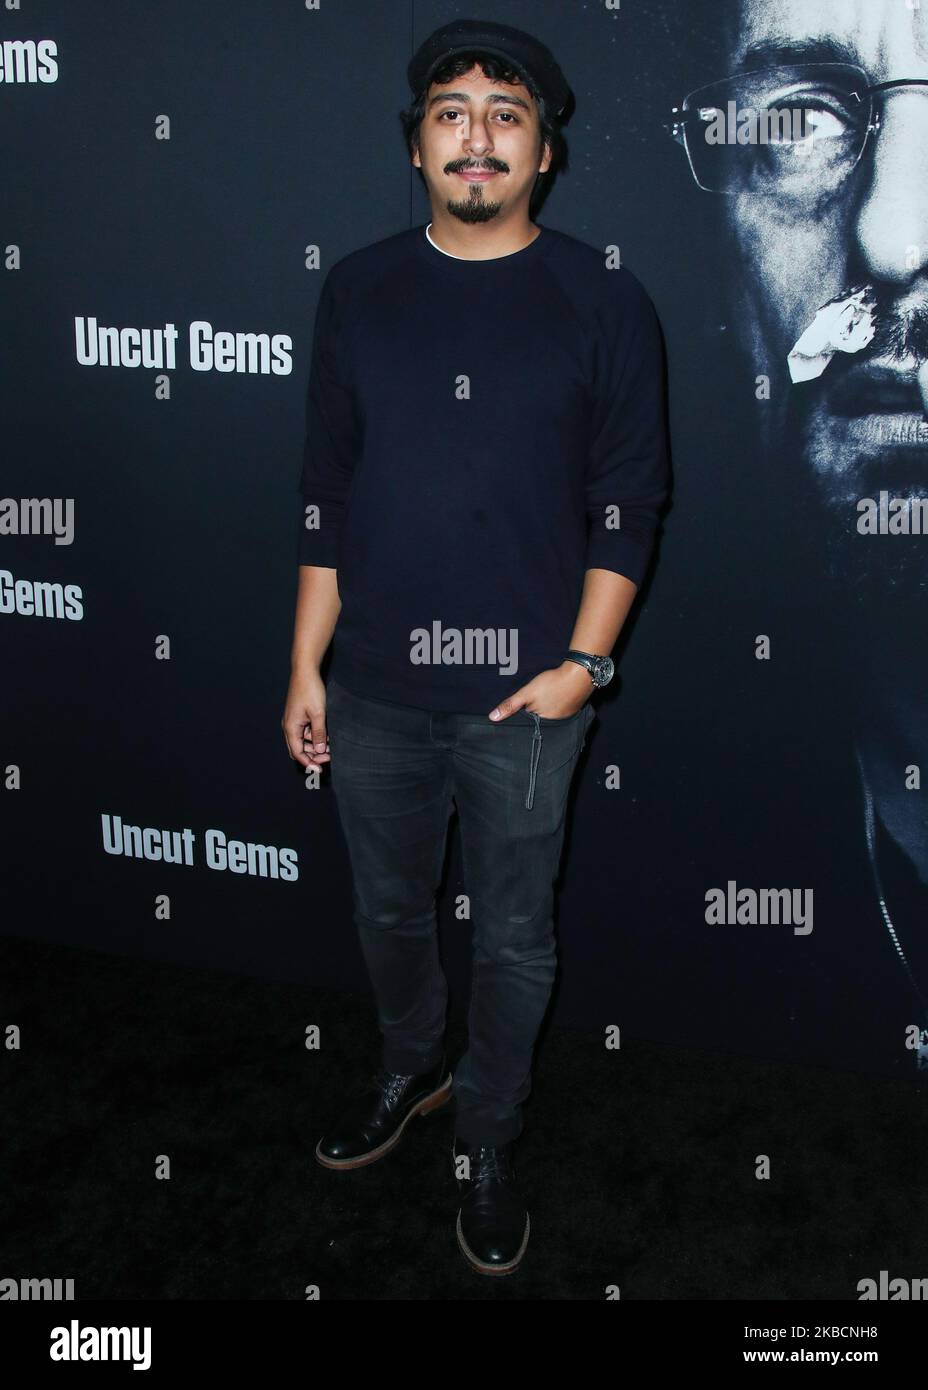 HOLLYWOOD, LOS ANGELES, CALIFORNIA, USA - DECEMBER 11: Actor Tony Revolori arrives at the Los Angeles Premiere Of A24's 'Uncut Gems' held at the ArcLight Cinerama Dome on December 11, 2019 in Hollywood, Los Angeles, California, United States. (Photo by Xavier Collin/Image Press Agency/NurPhoto) Stock Photo